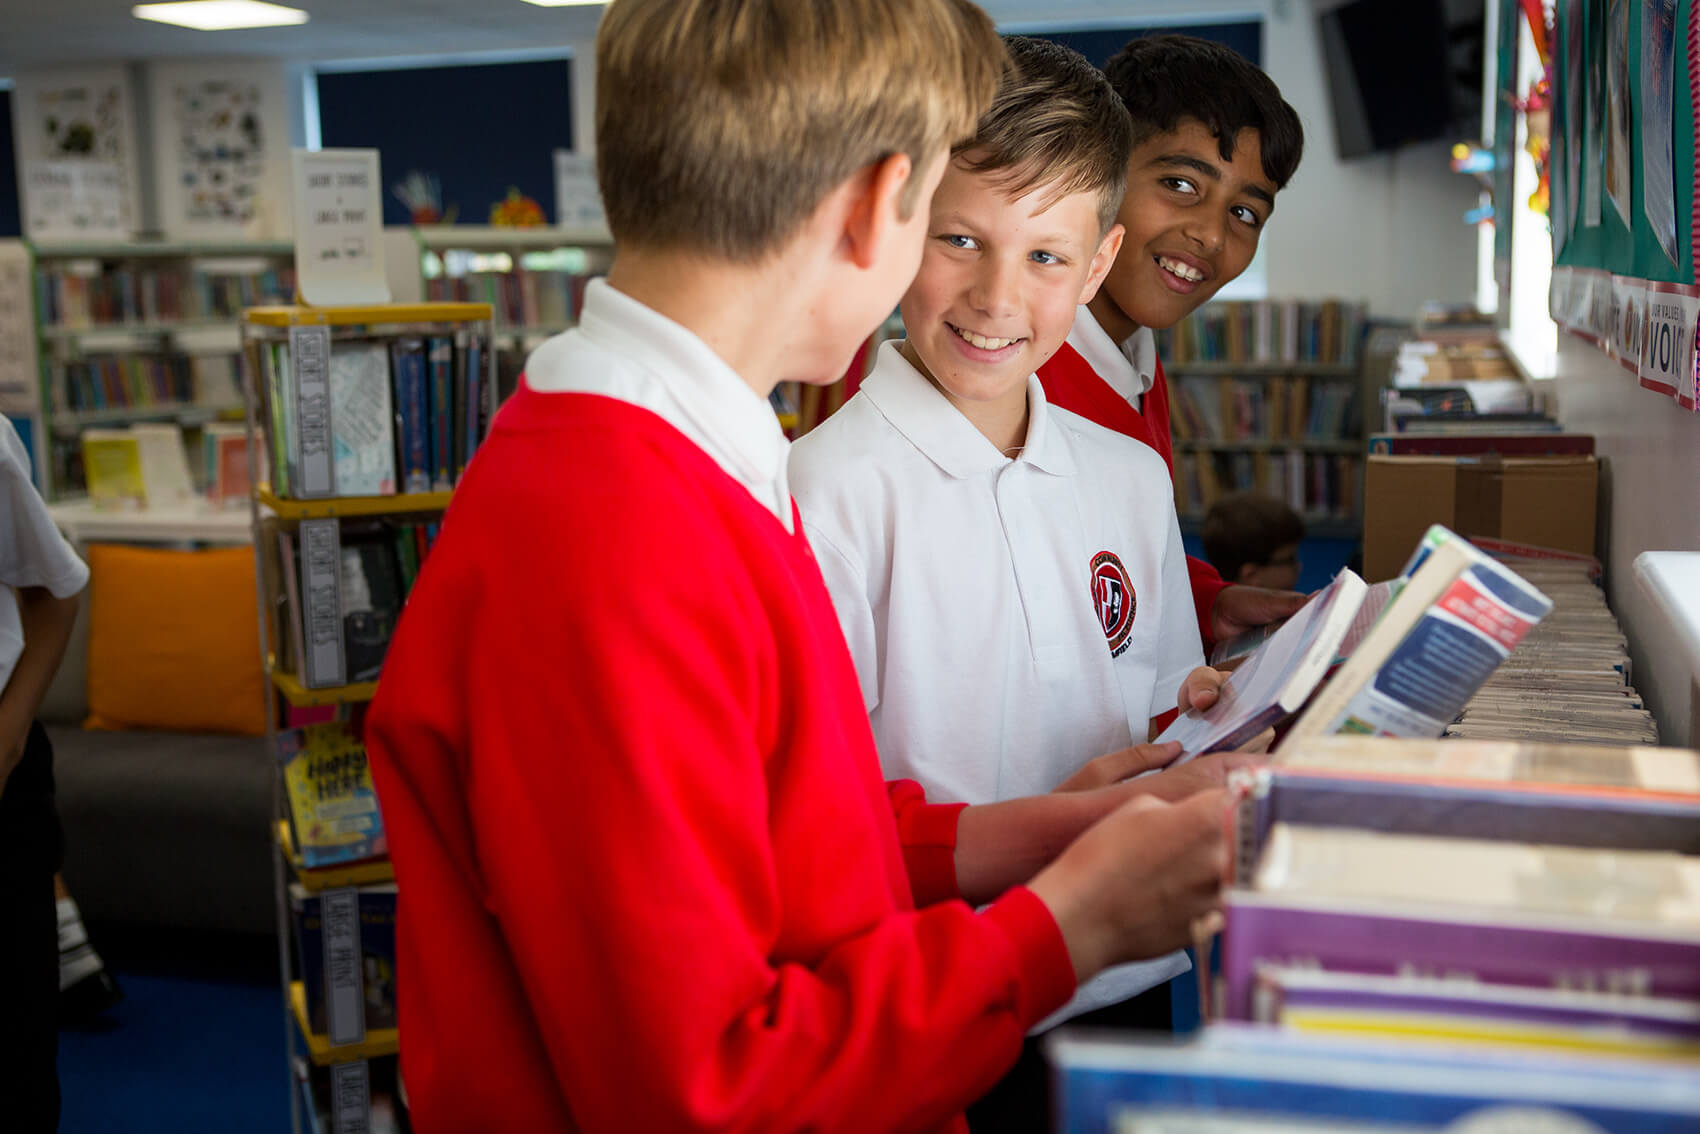 Three children discussing books in a library